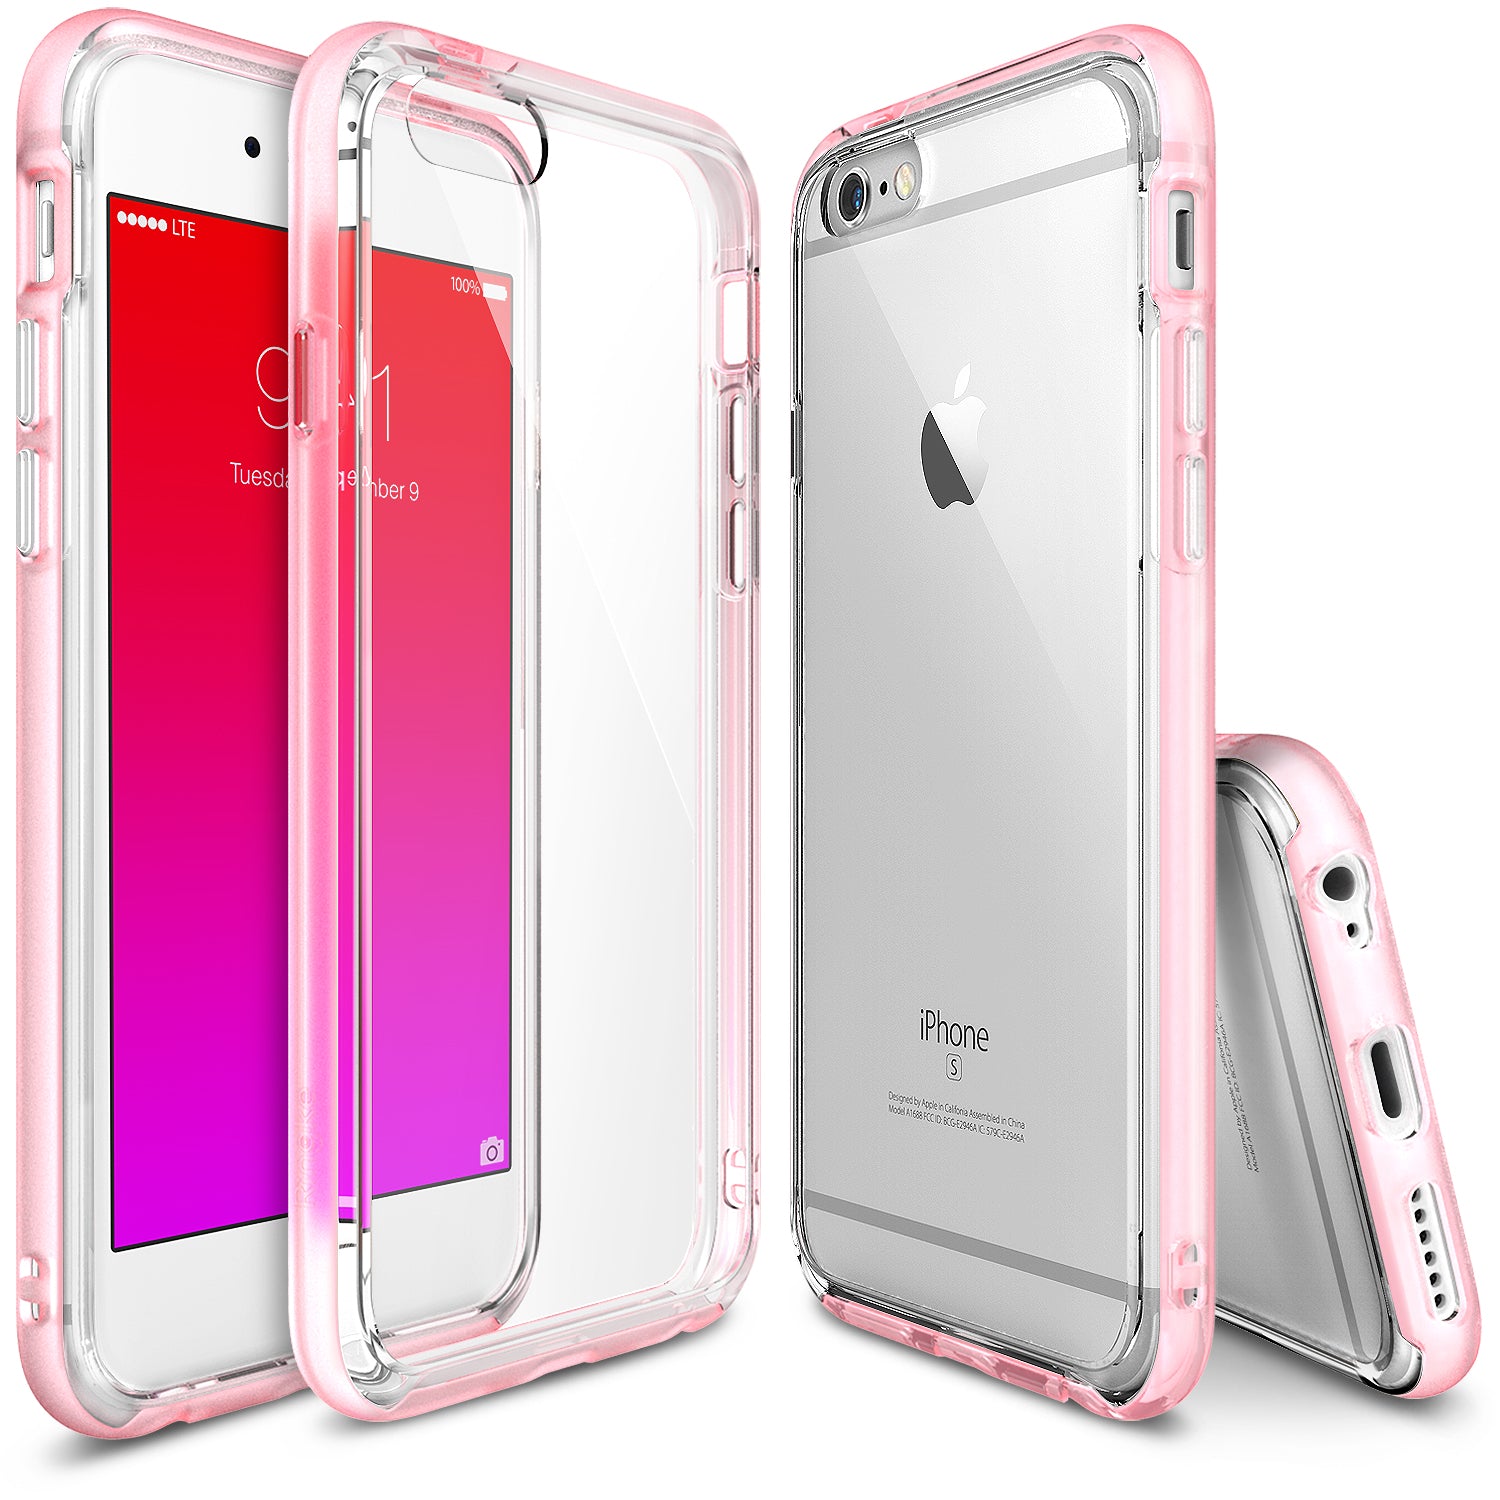 ringke frame bezel side protection case cover for iphone 6 6s main frost pink